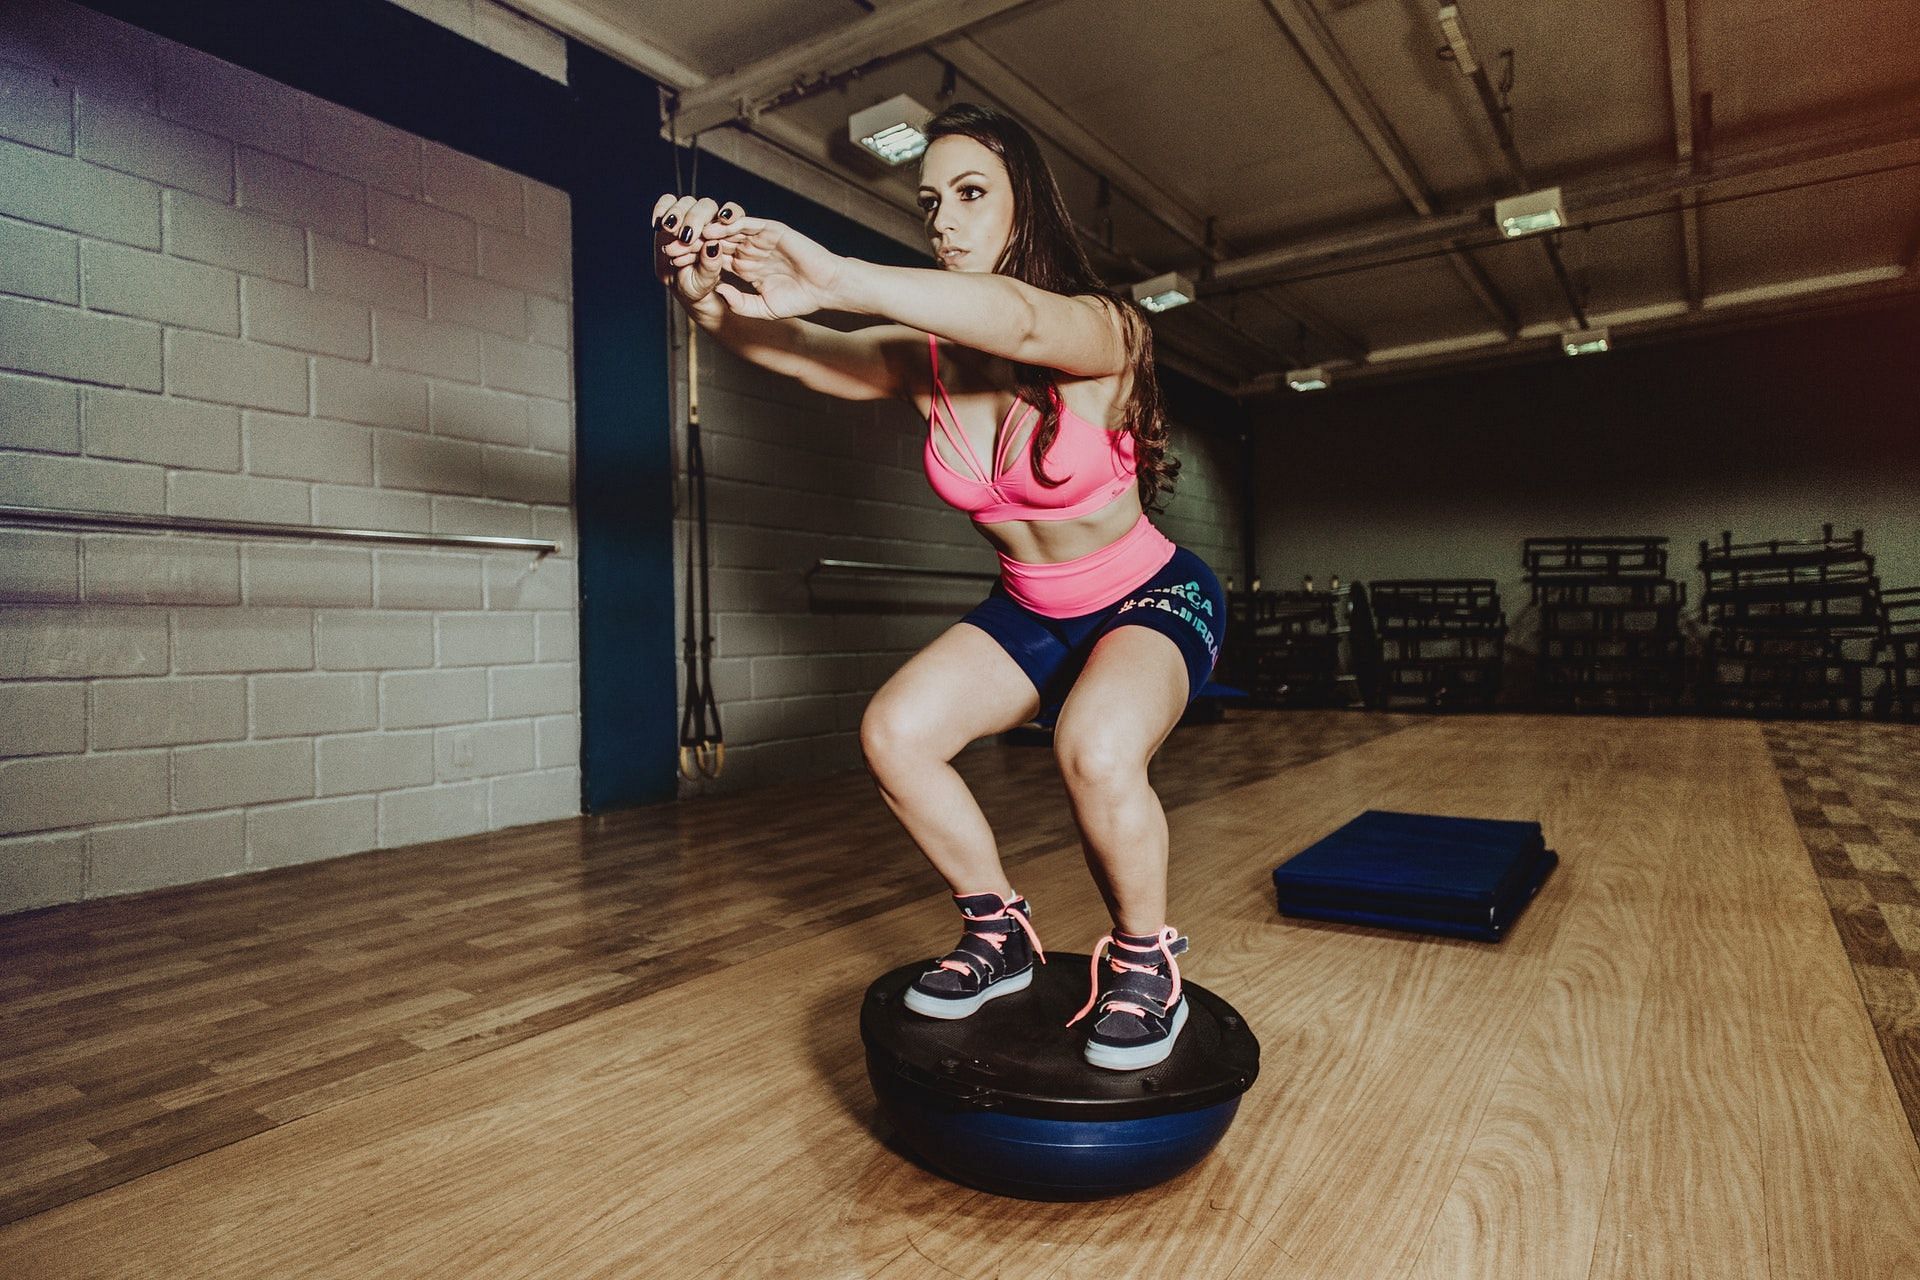 Exercises done on BOSU are effective and challenging. (Photo by Jonathan Borba via pexels)